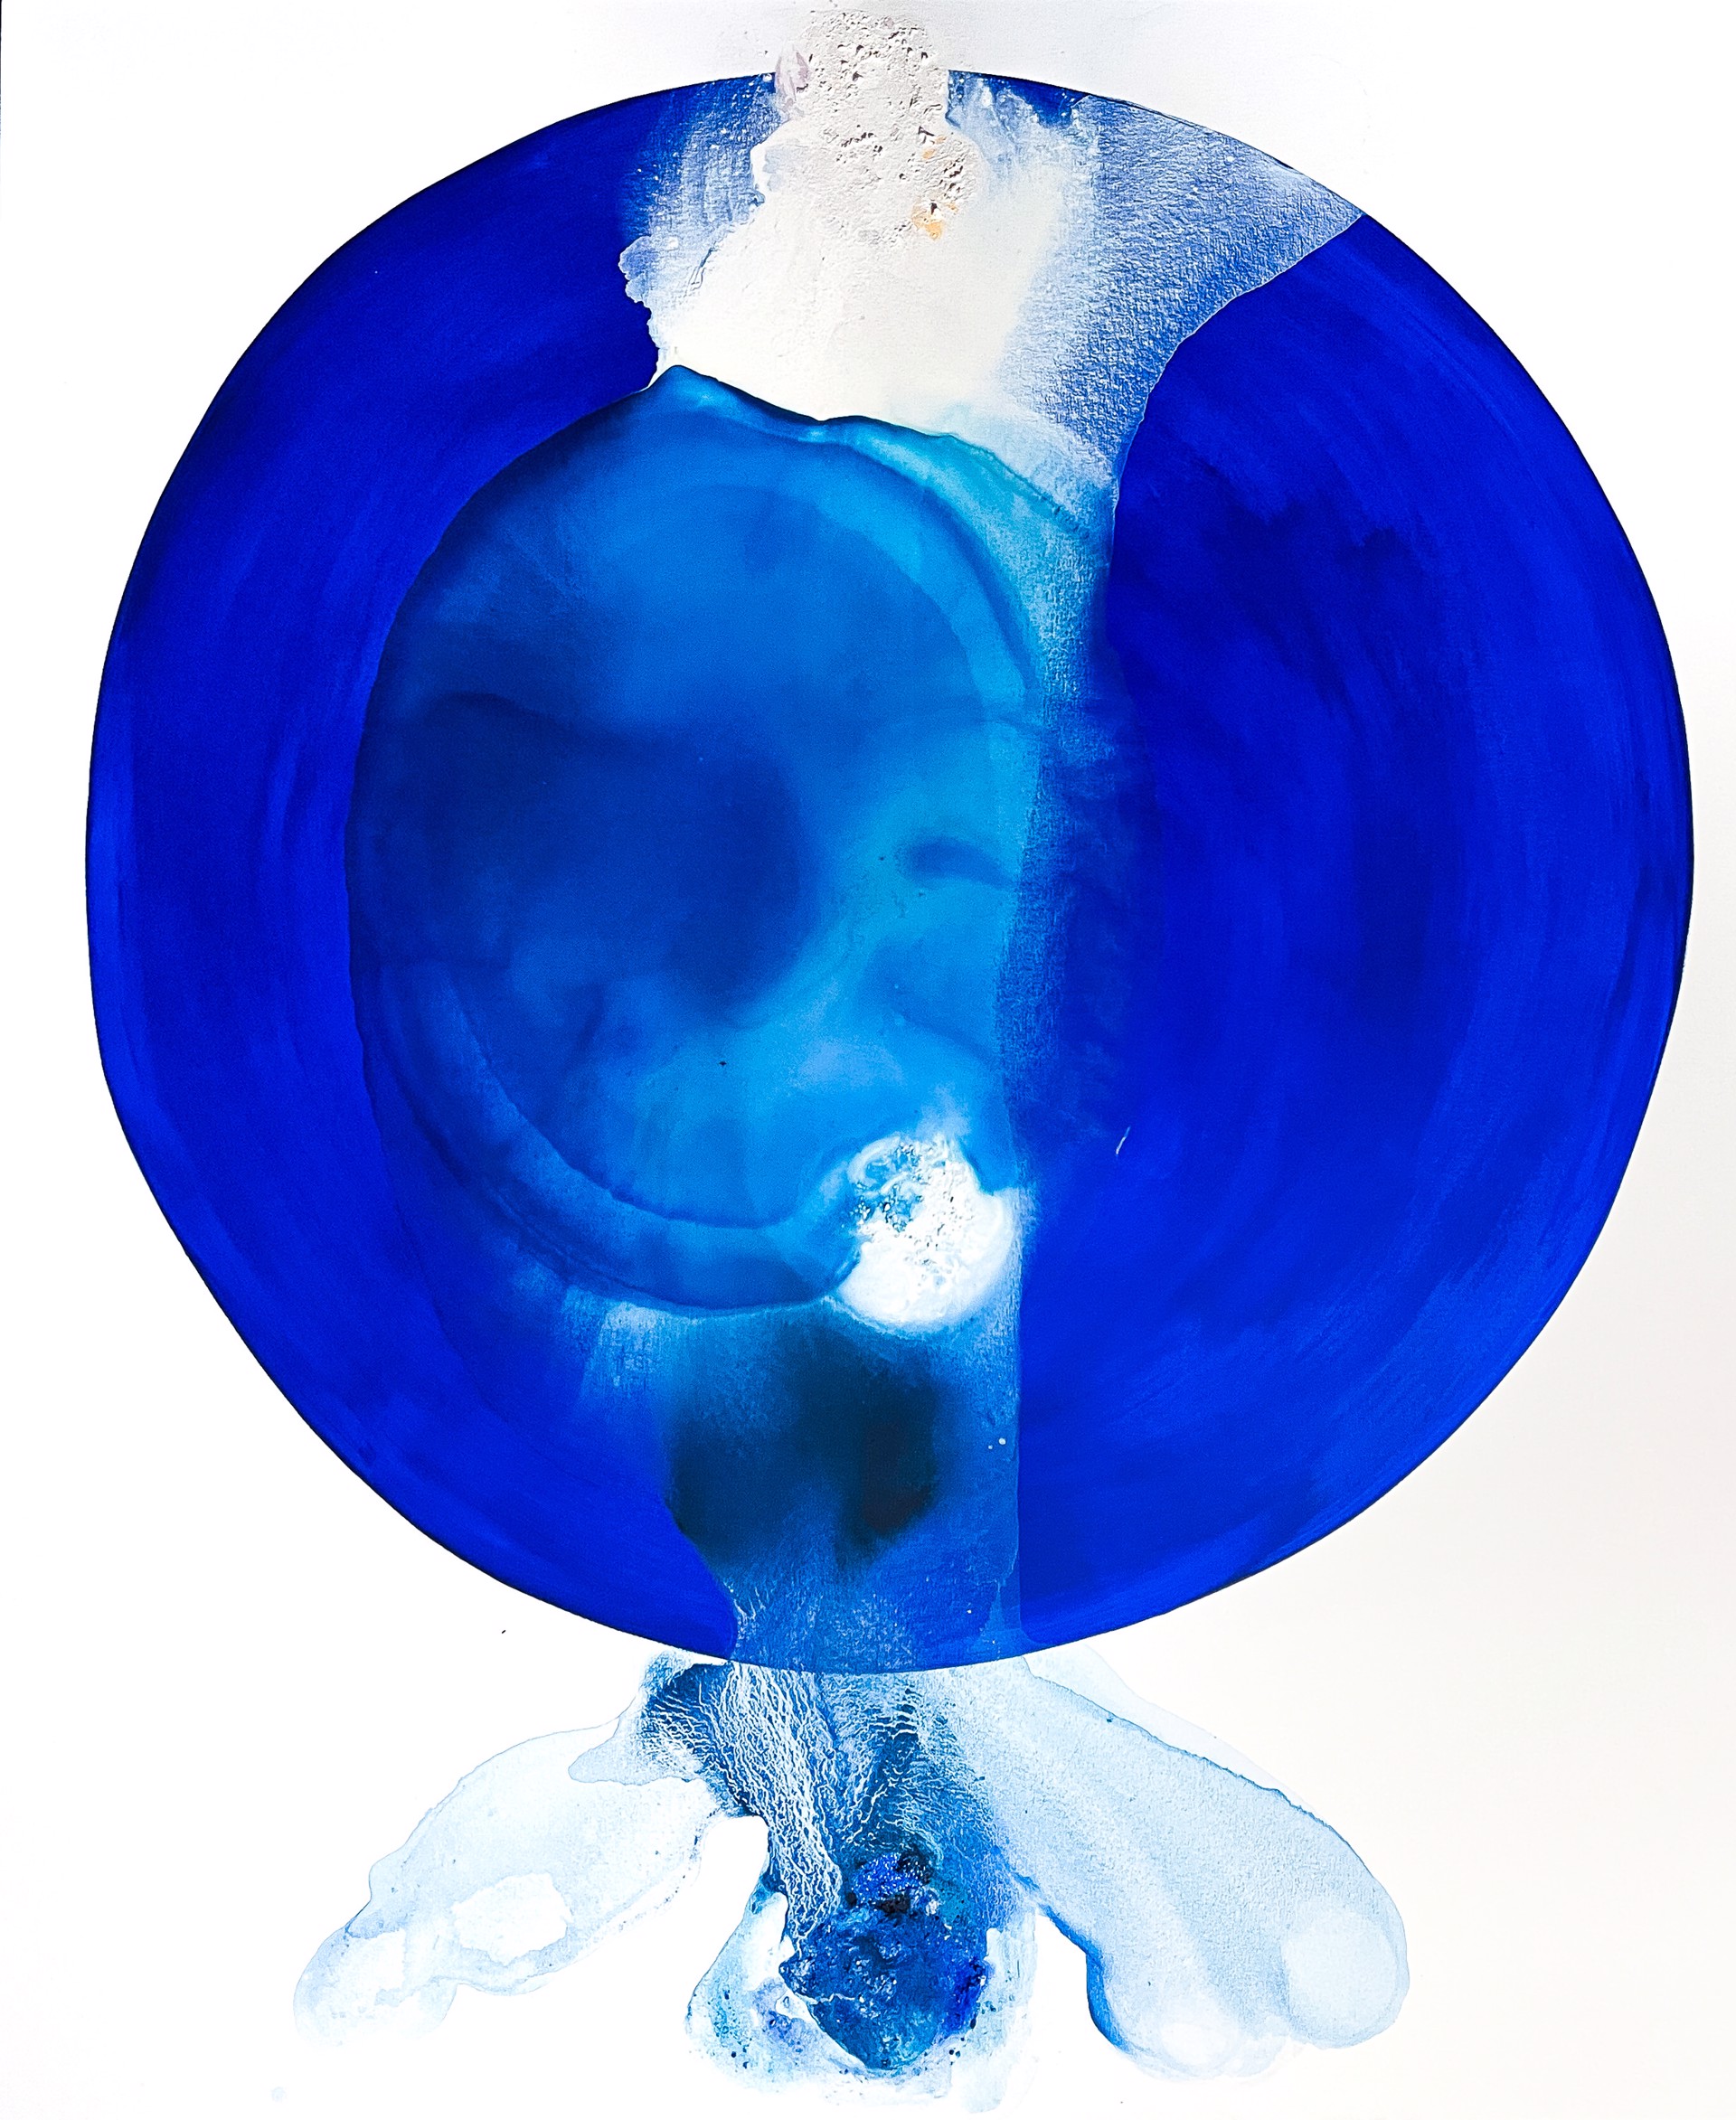 Float: A wave of Ultramarine, a belonging within the serenity of breath by Gav Barbey